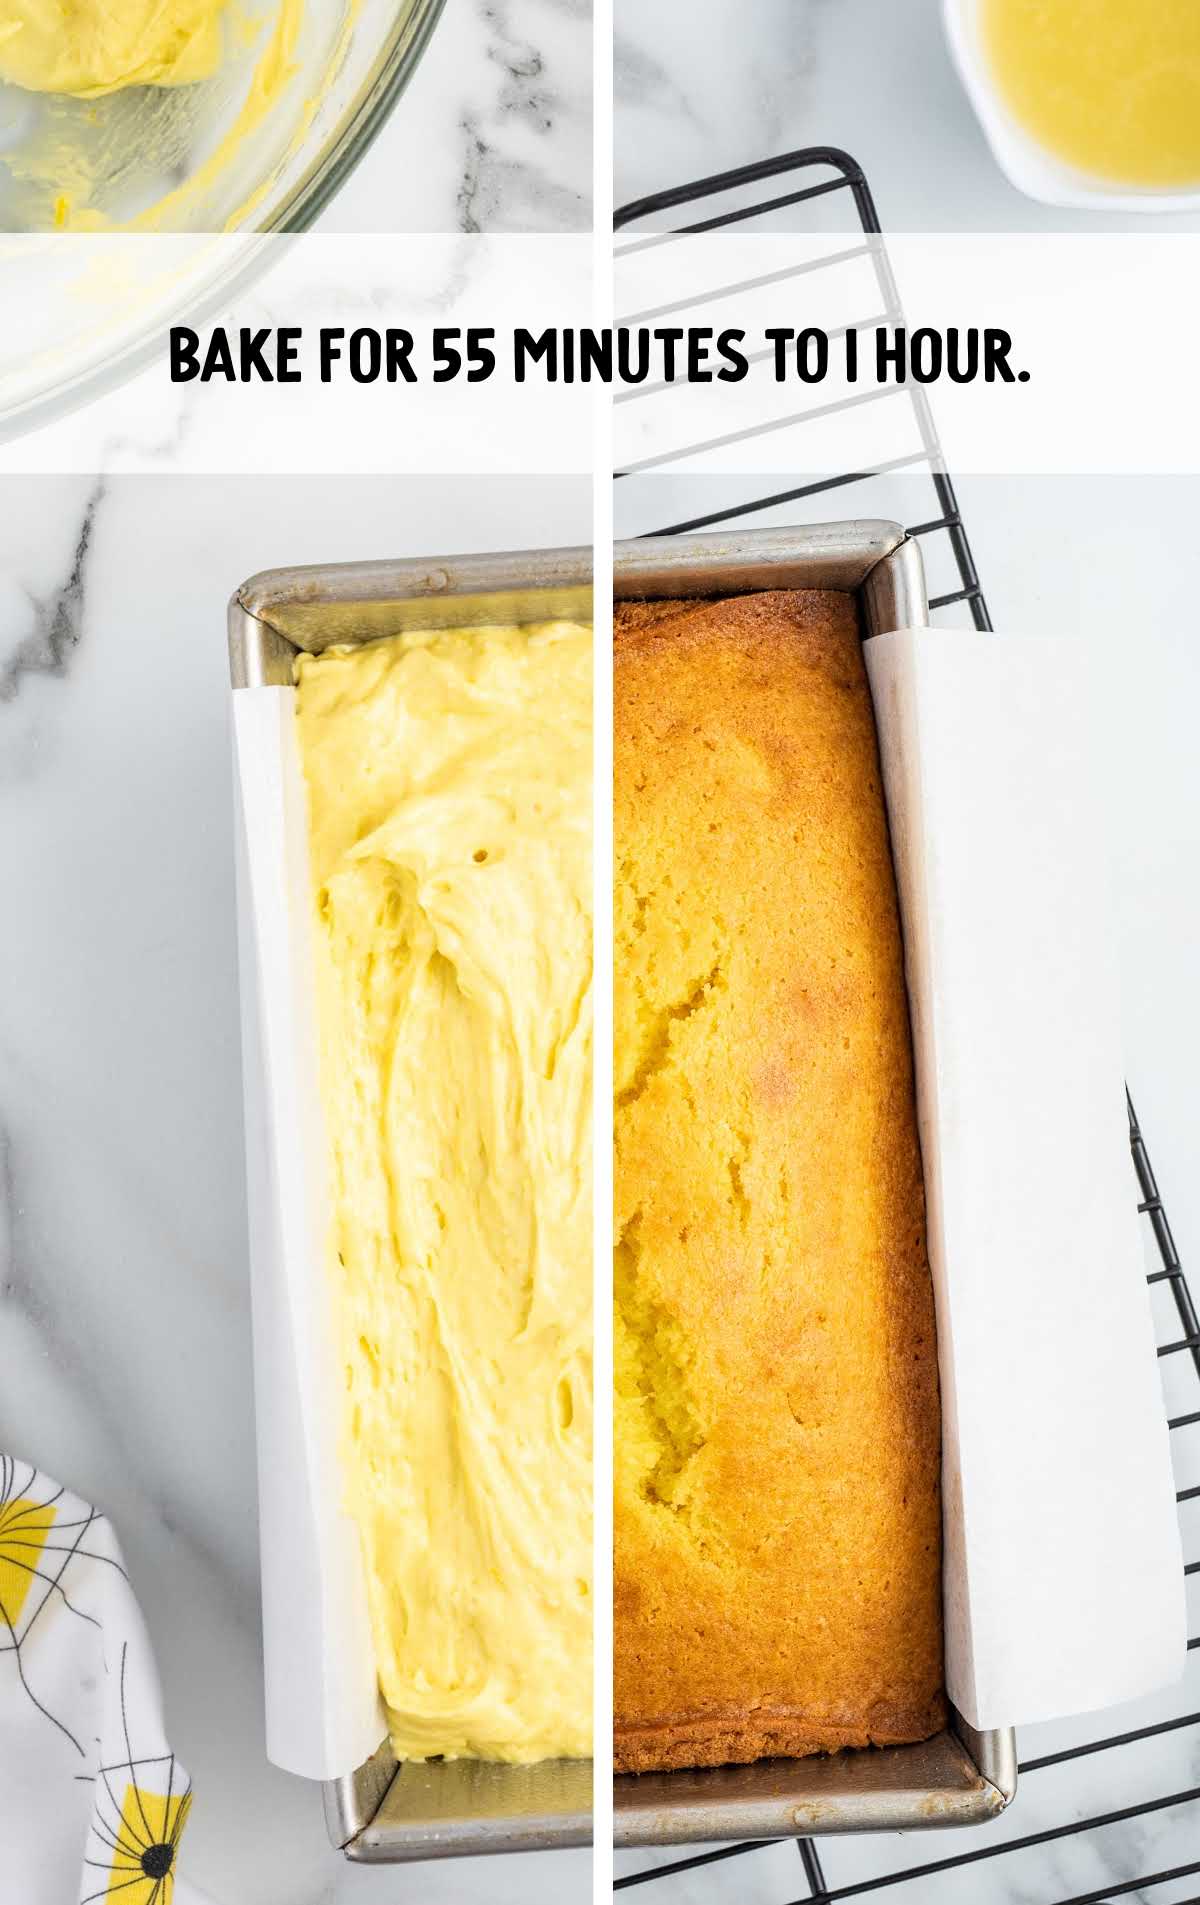 cake baked for 55 minutes